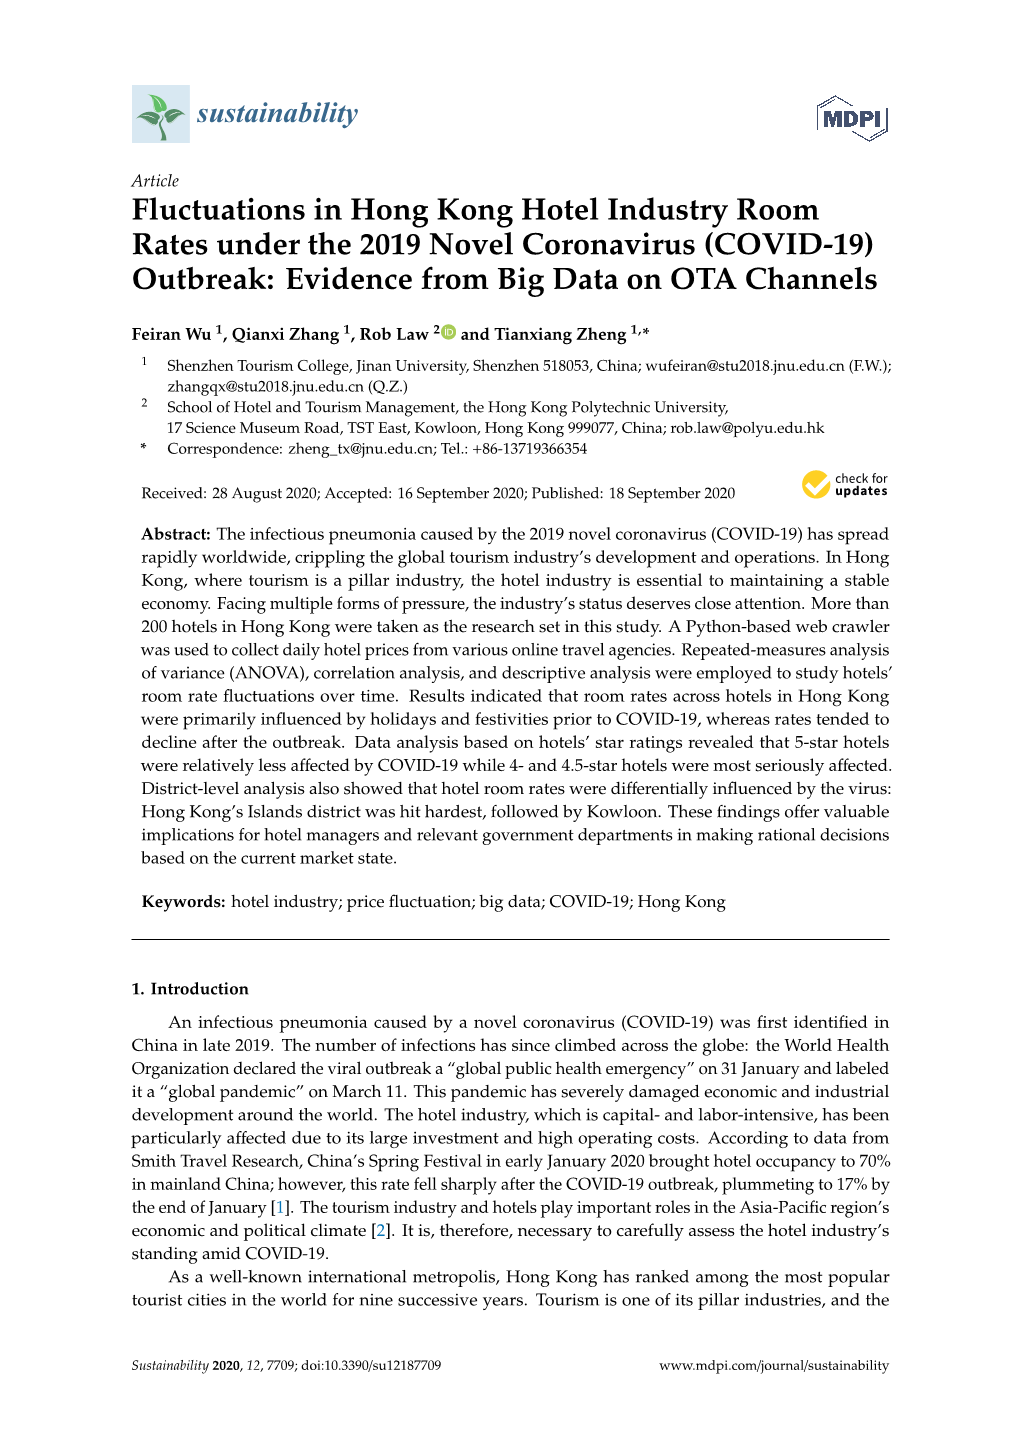 Fluctuations in Hong Kong Hotel Industry Room Rates Under the 2019 Novel Coronavirus (COVID-19) Outbreak: Evidence from Big Data on OTA Channels